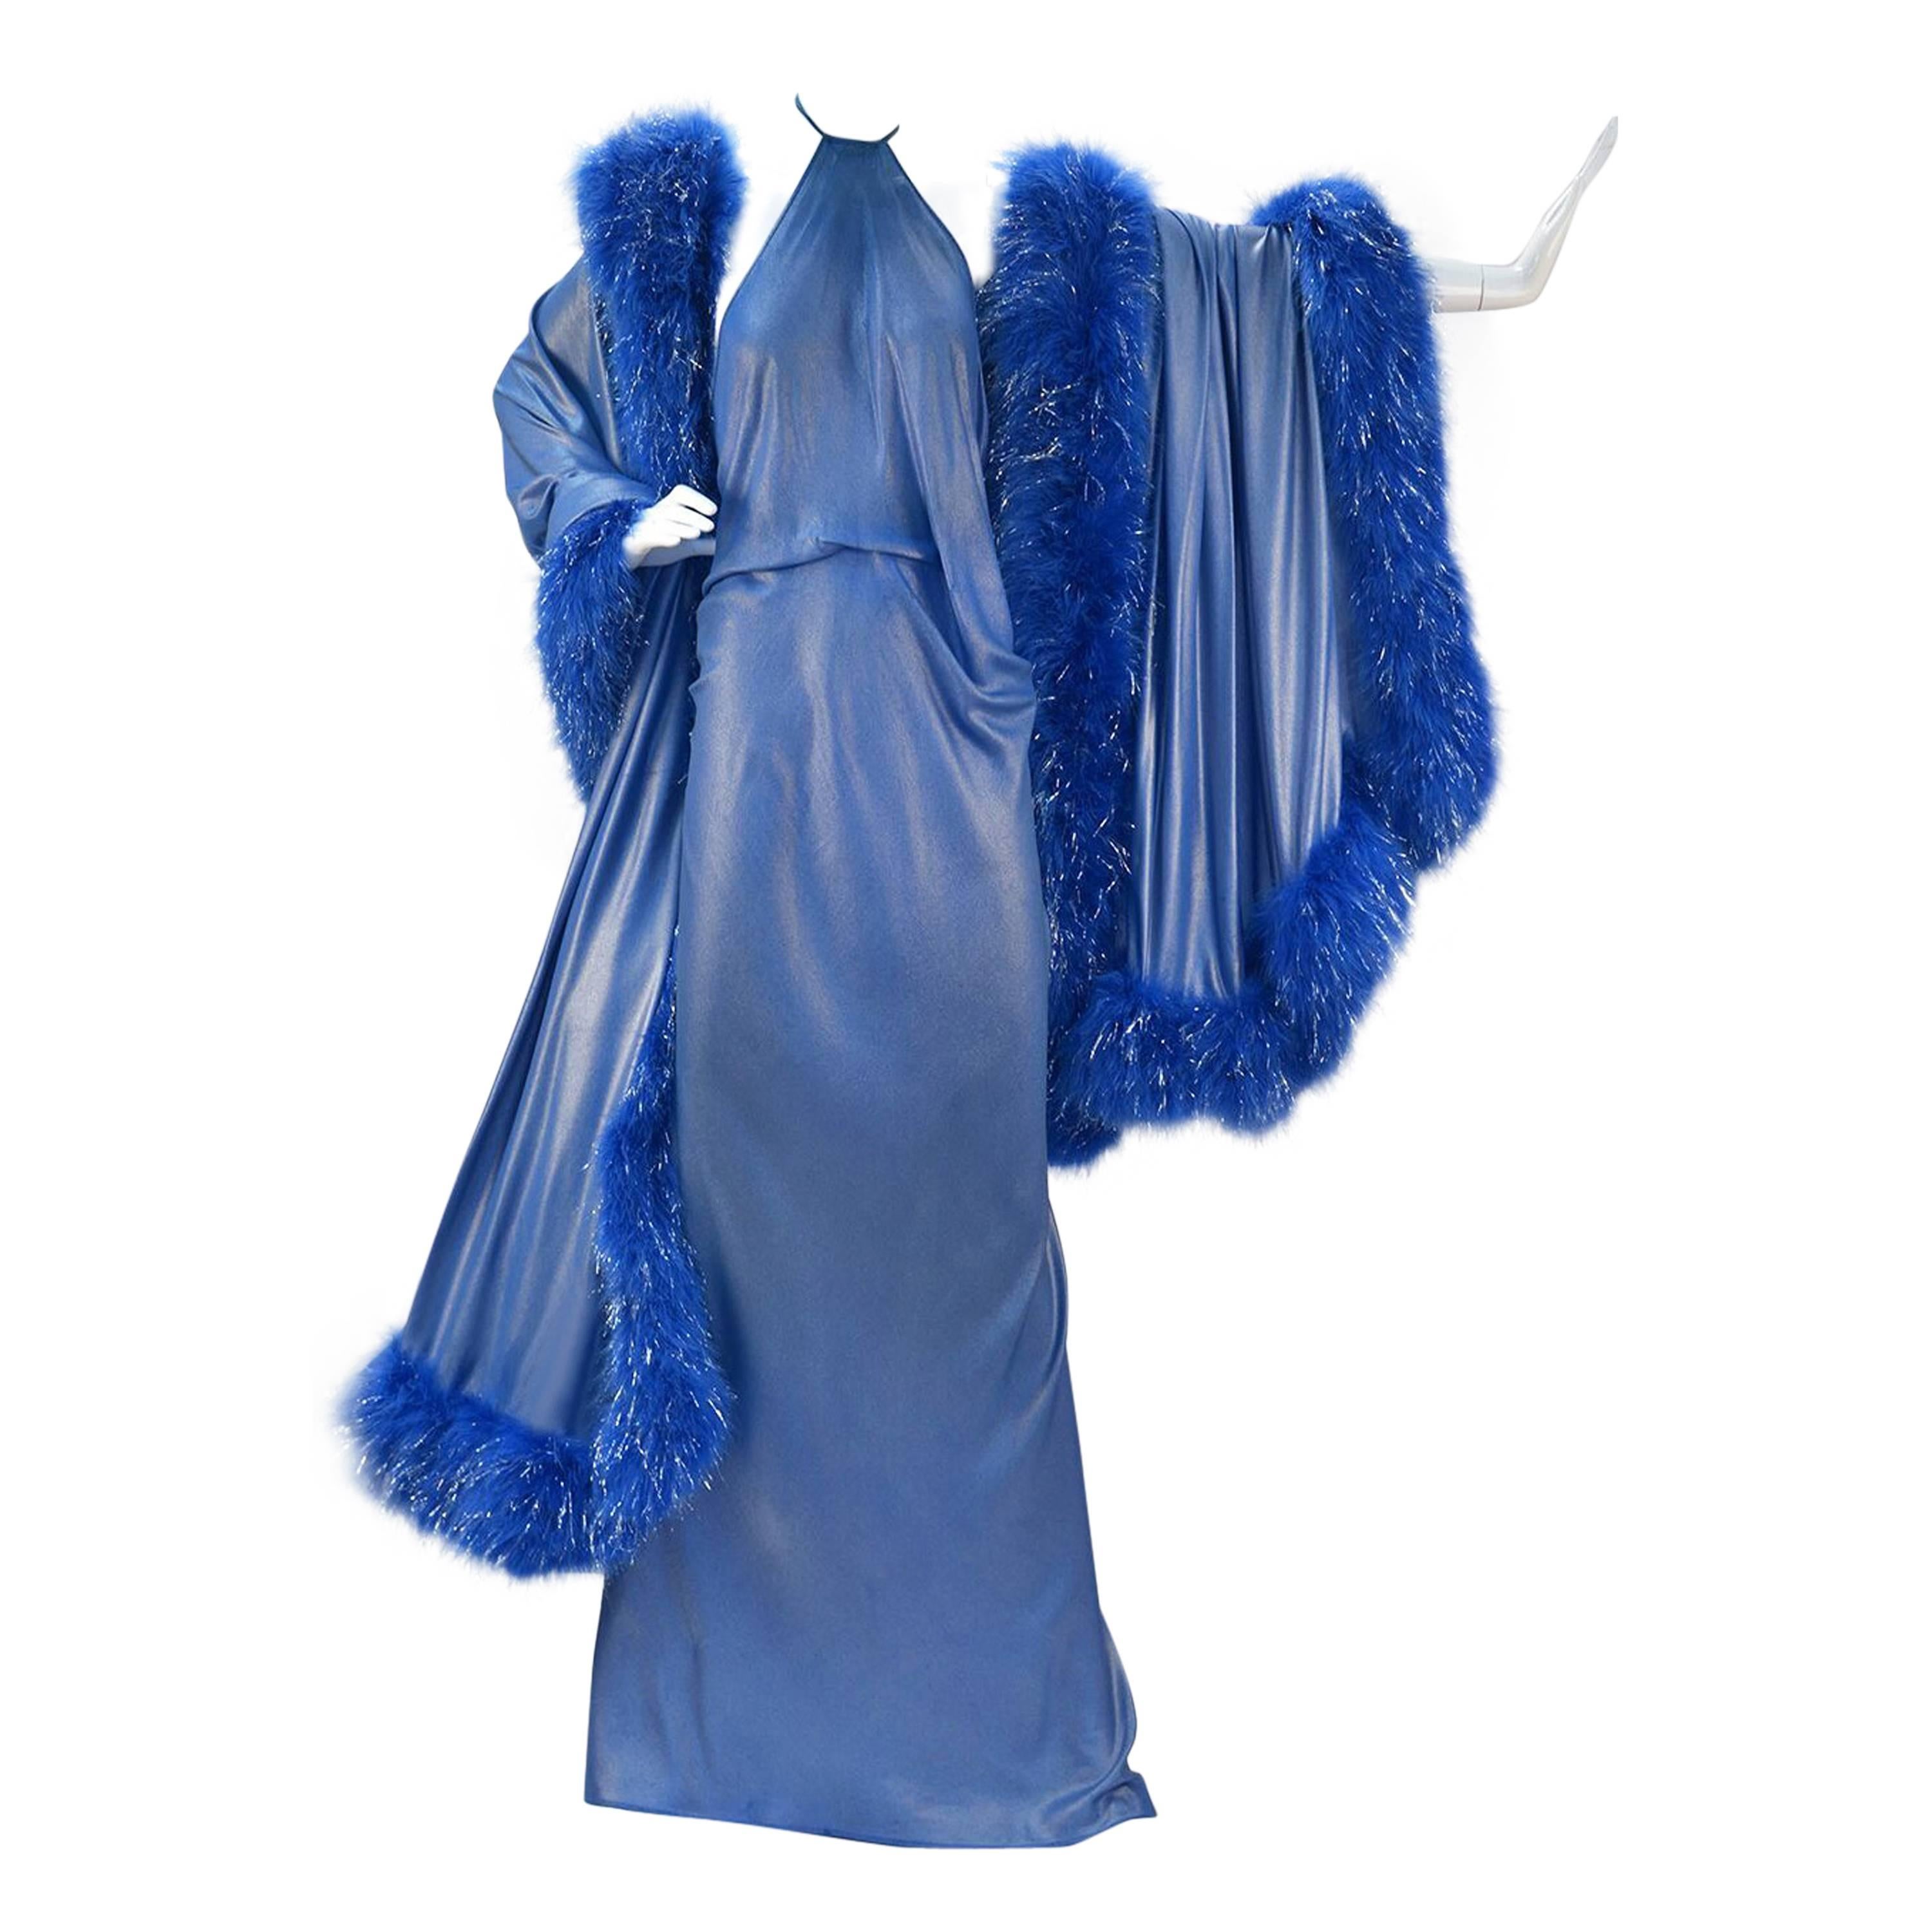 1994 Renalto Balestra Metallic Blue Halter Gown with Shawl For Sale